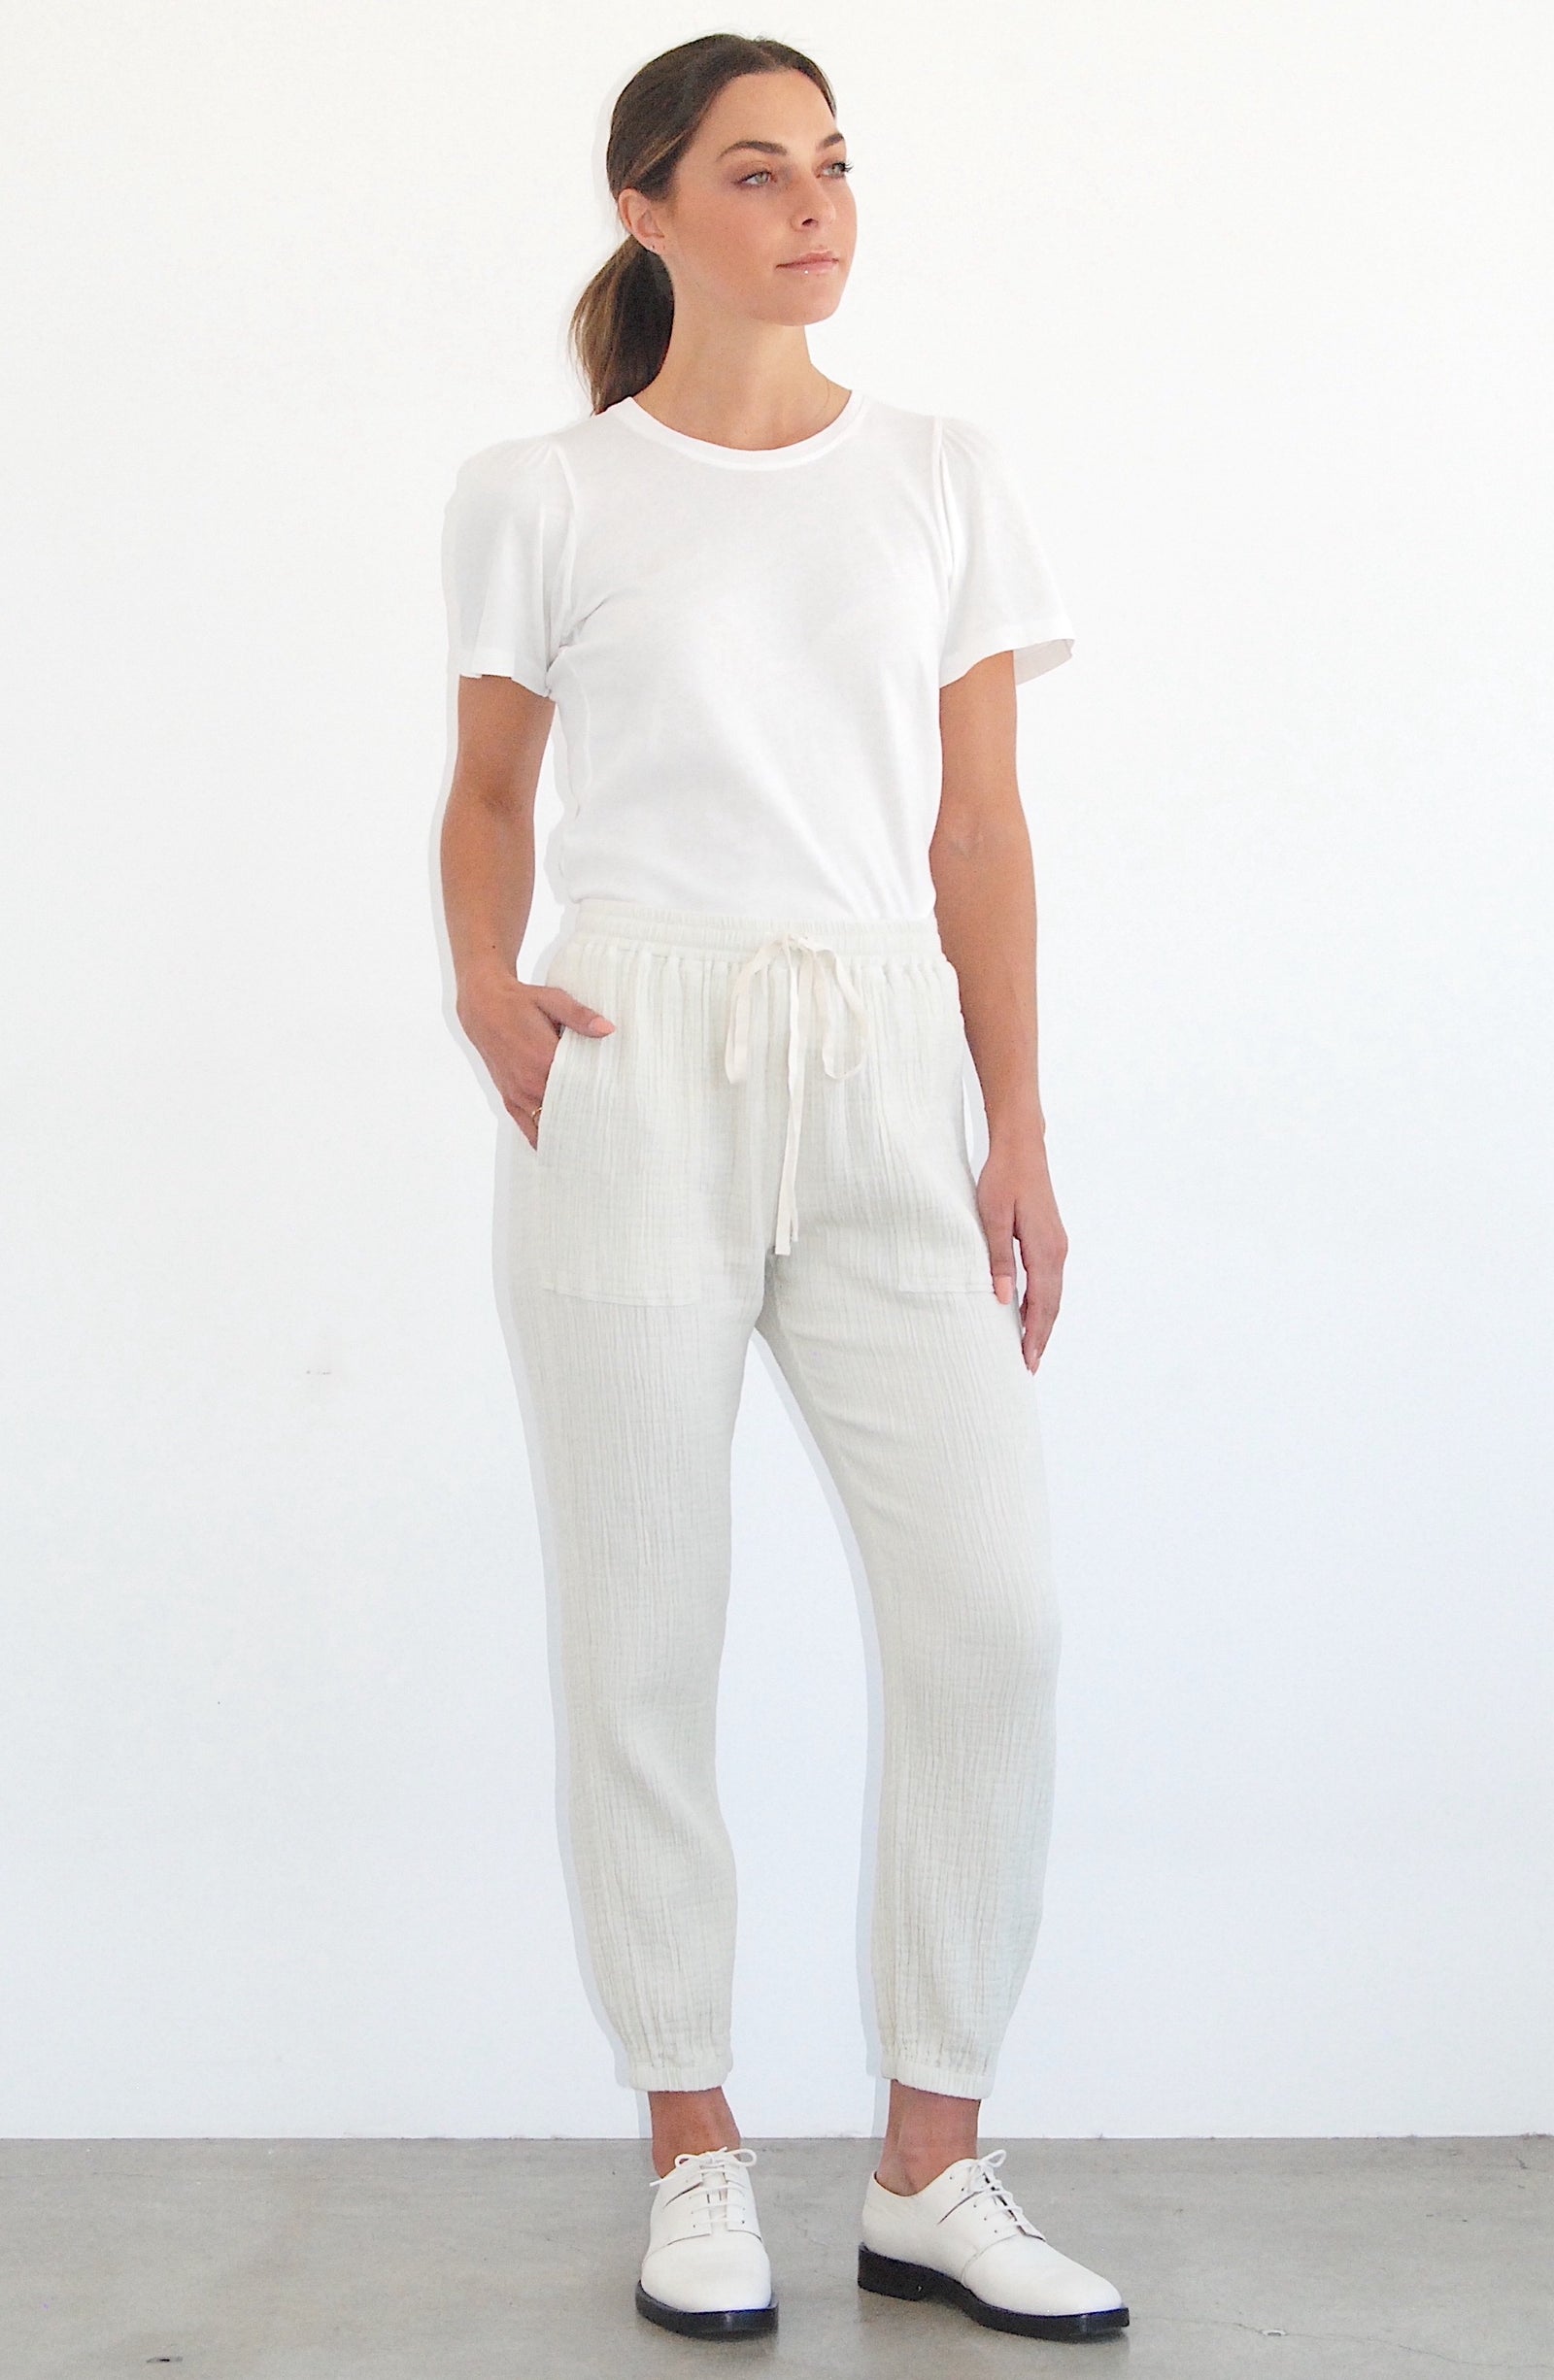 Dirty White Tracker Pant